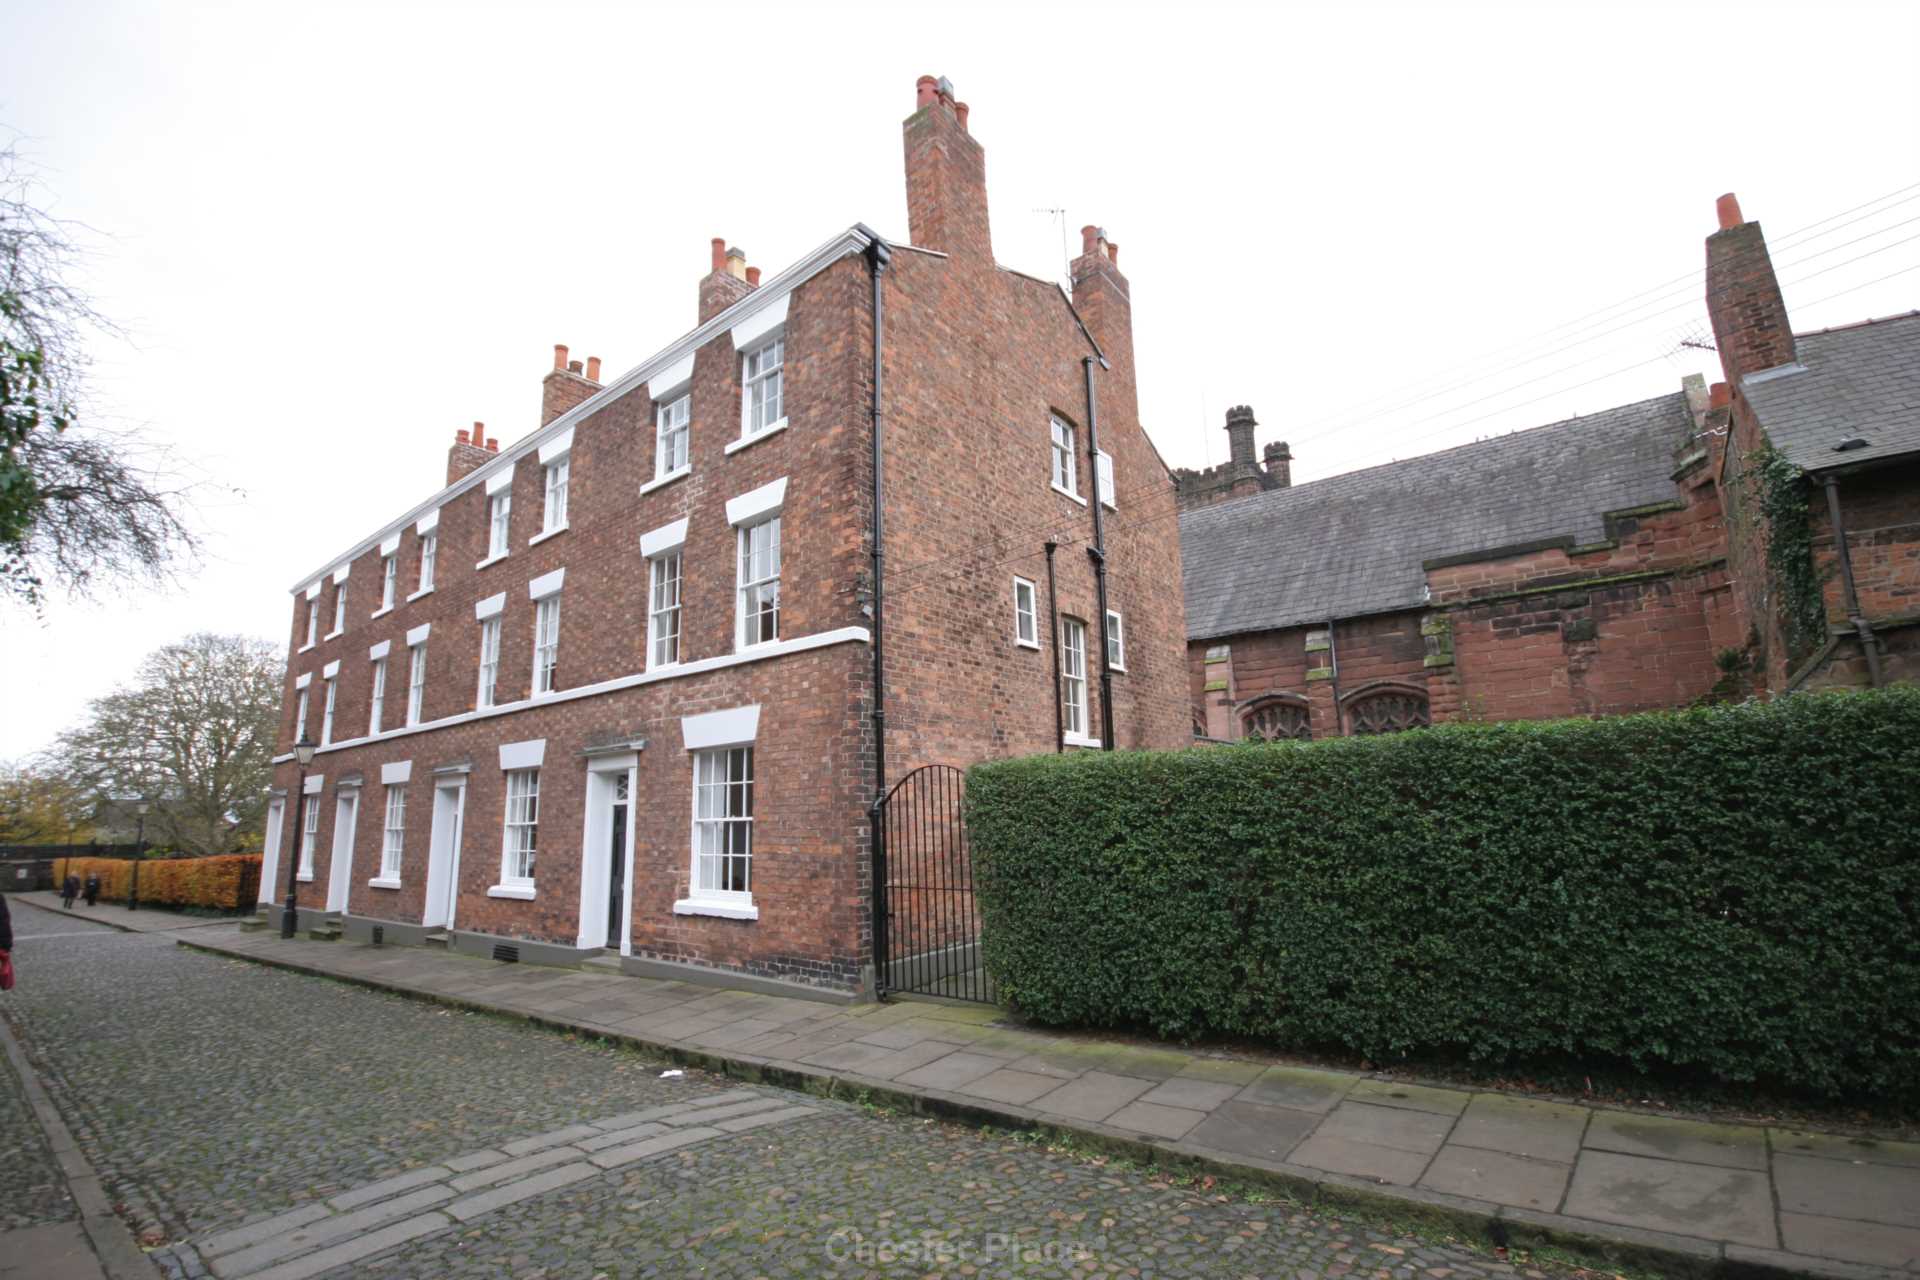 4 bed Town House for rent in Chester. From Chester Place